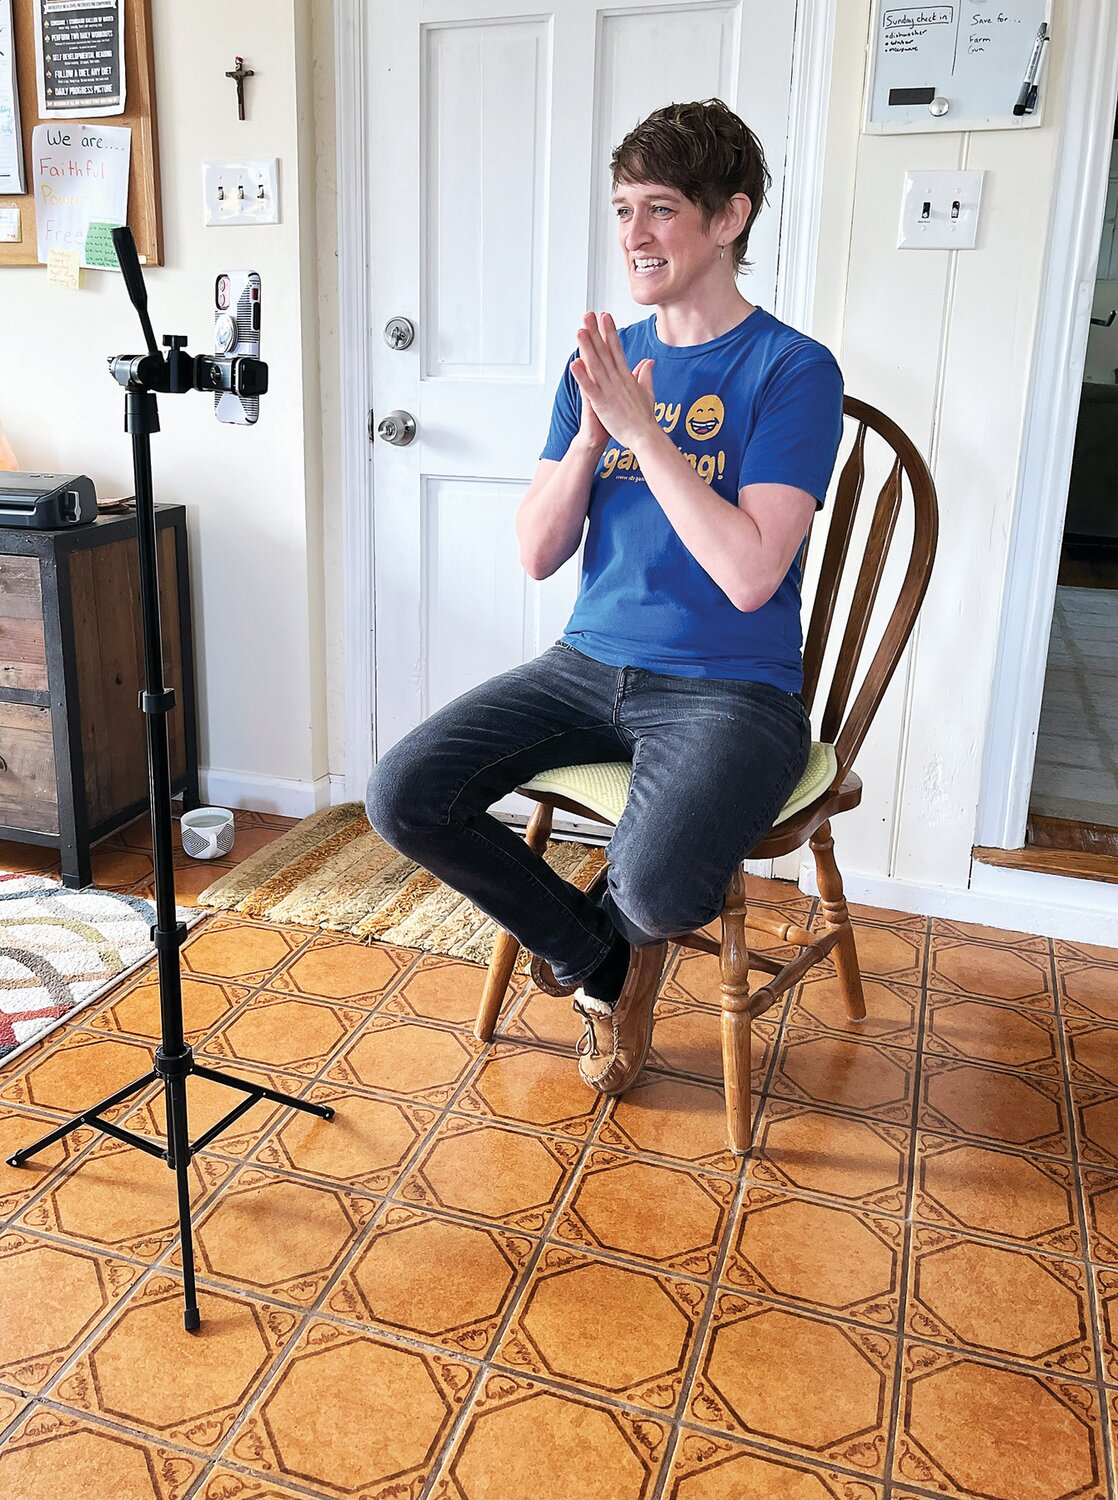 Christen Fackler records her own videos in the kitchen of her Plumstead farmhouse.